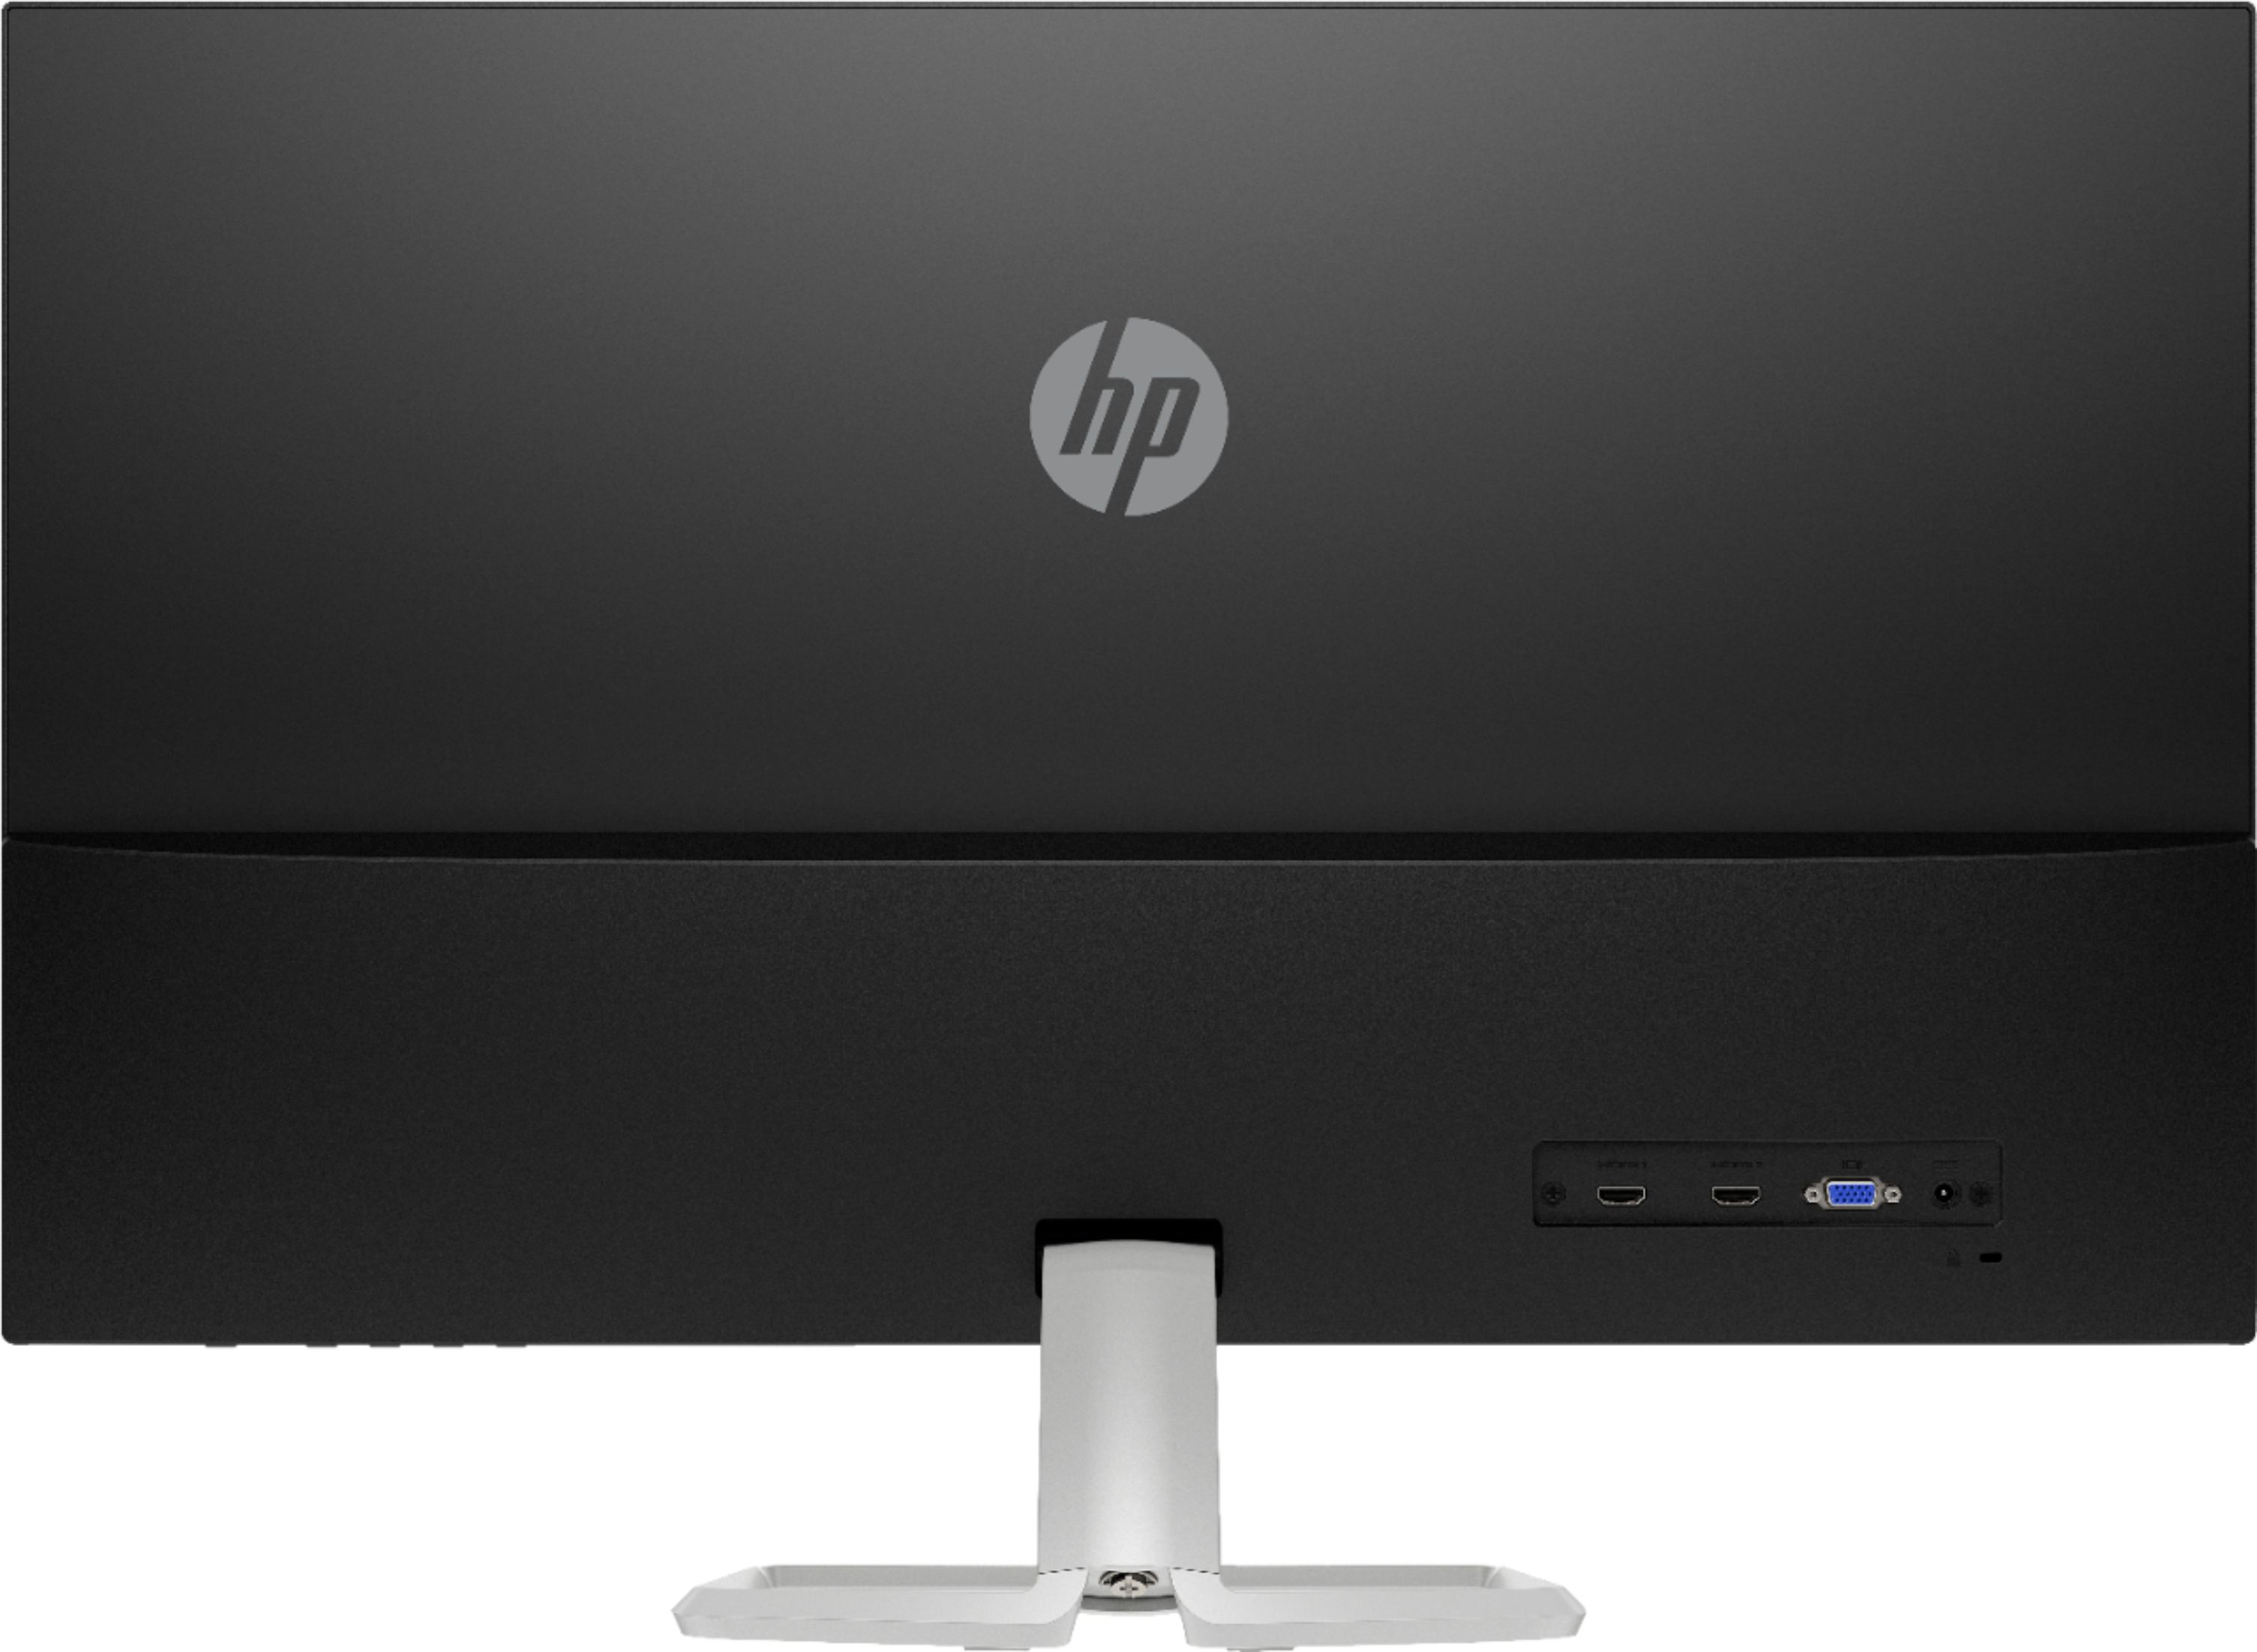 Back View: HP - Geek Squad Certified Refurbished 31.5" IPS LED FHD Monitor - Black